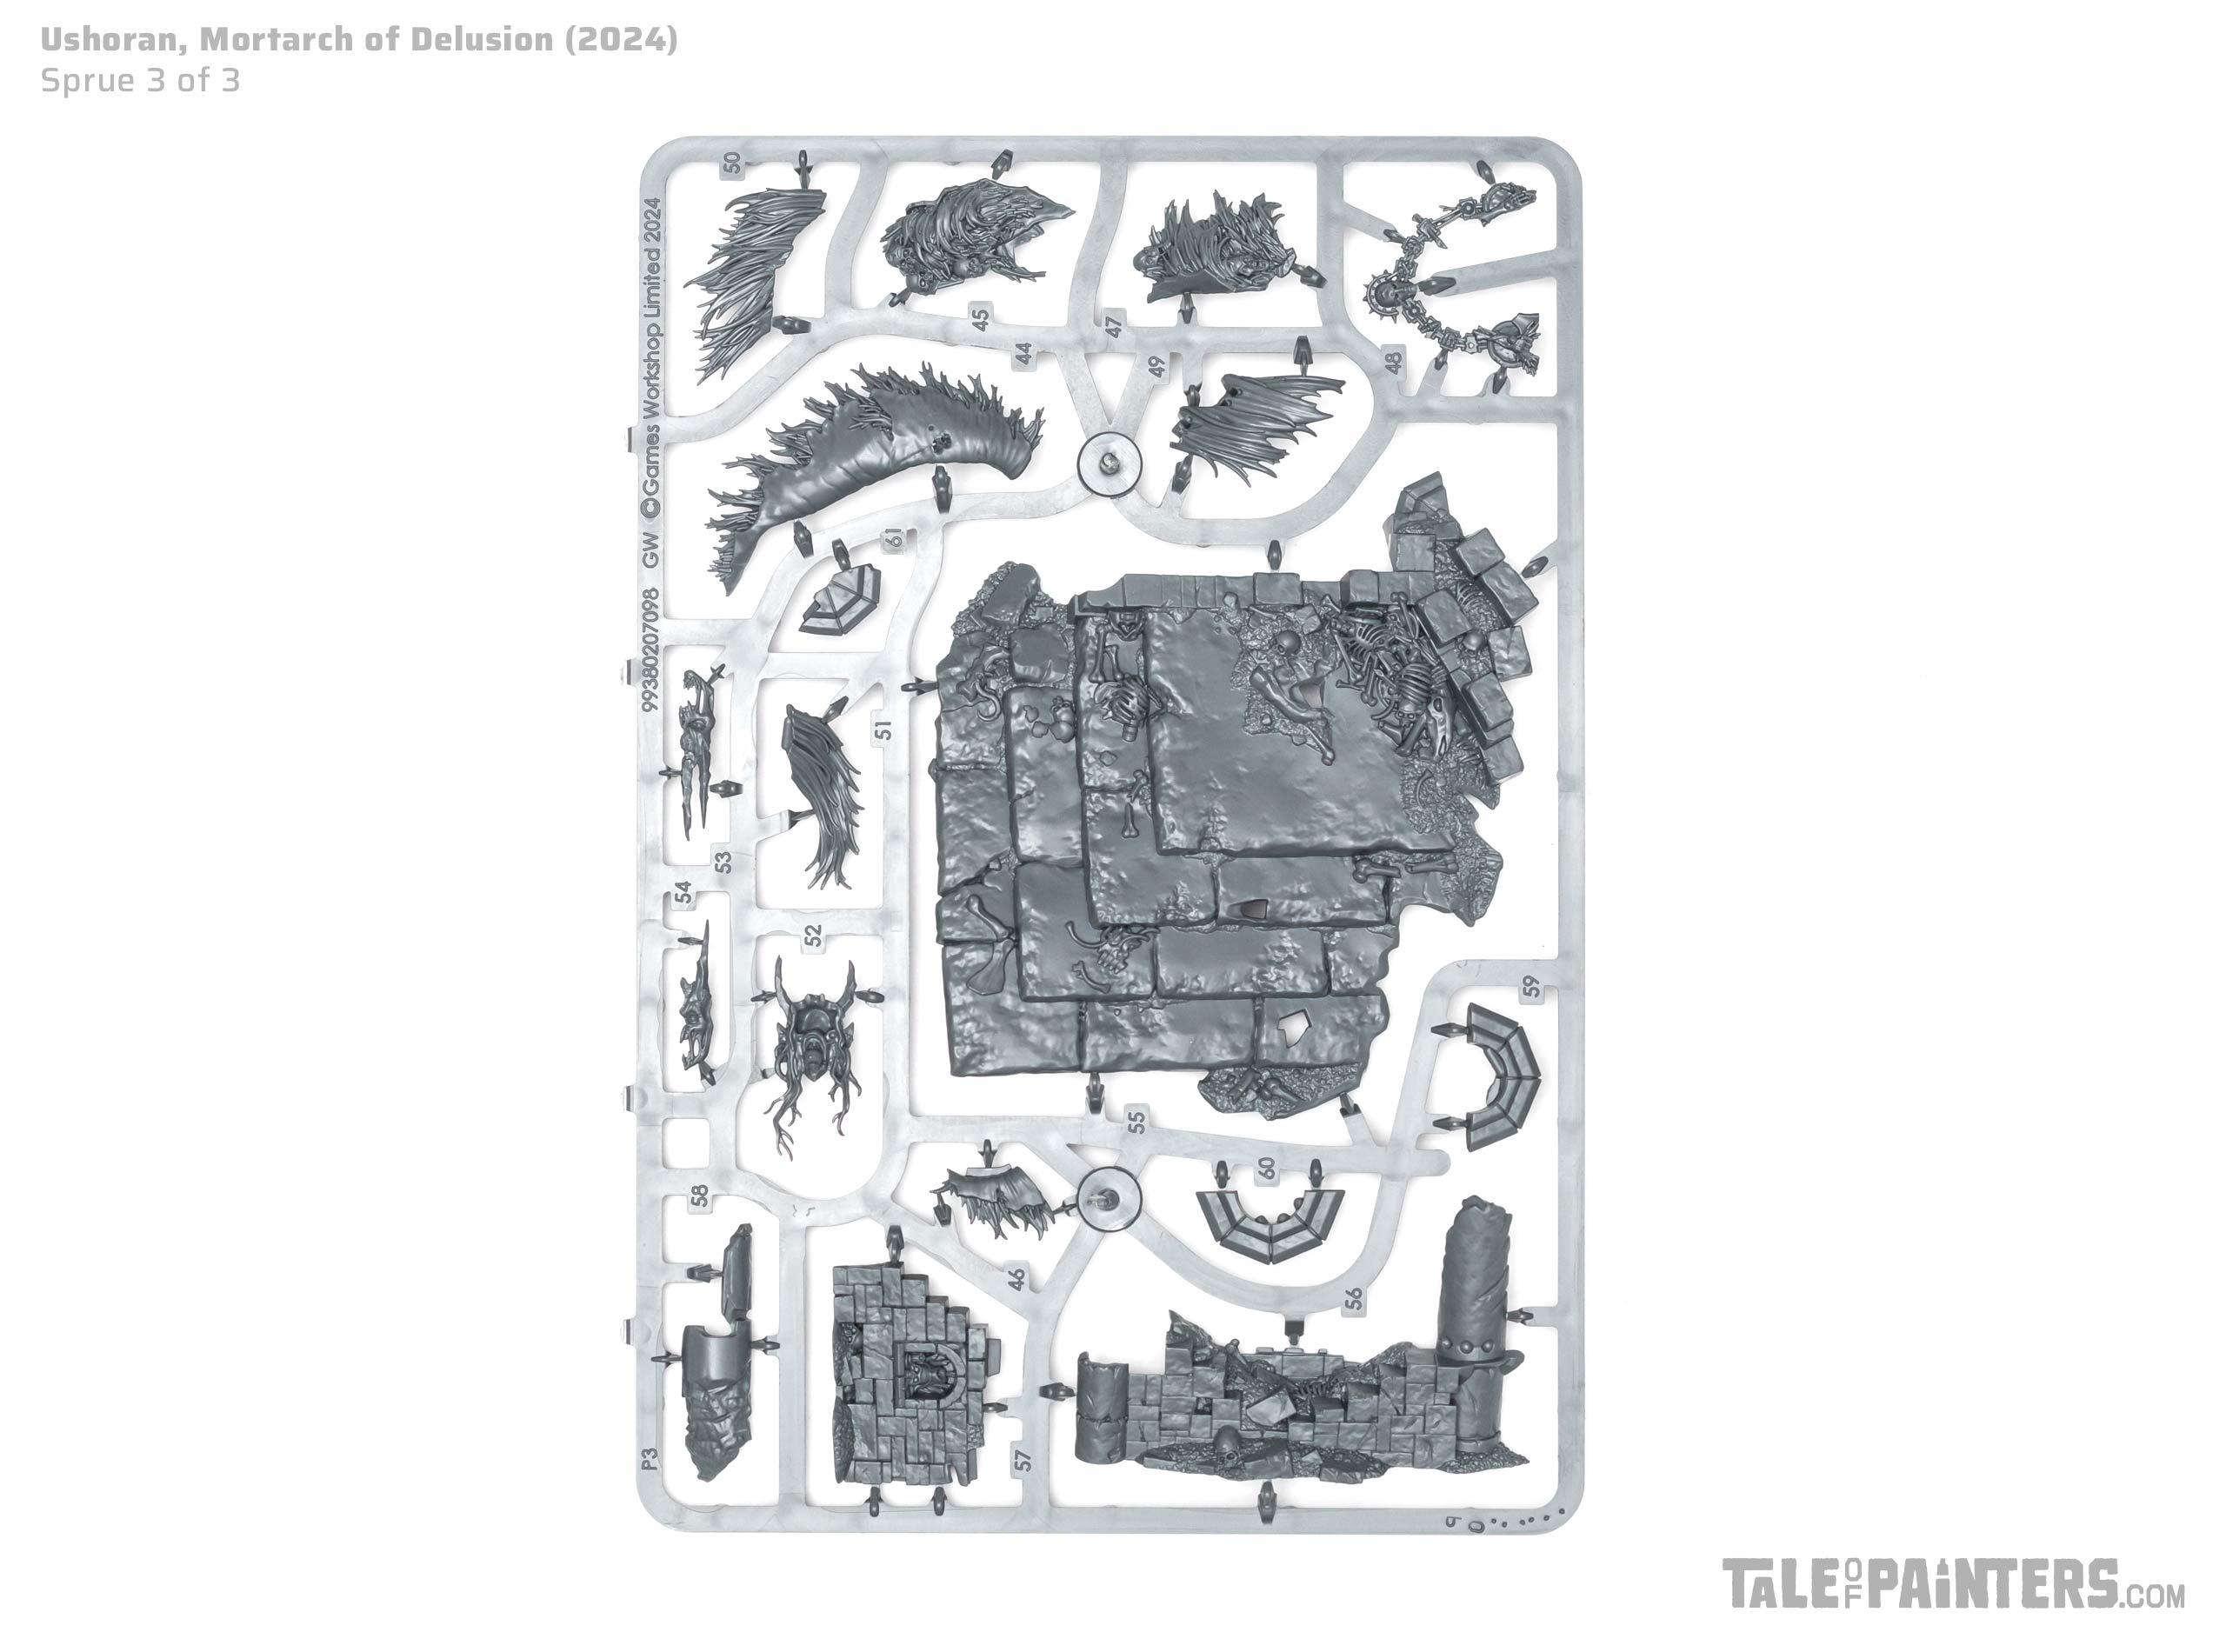 Flesh-eater Courts Ushoran Mortarch of Delusion sprue 3 of 3